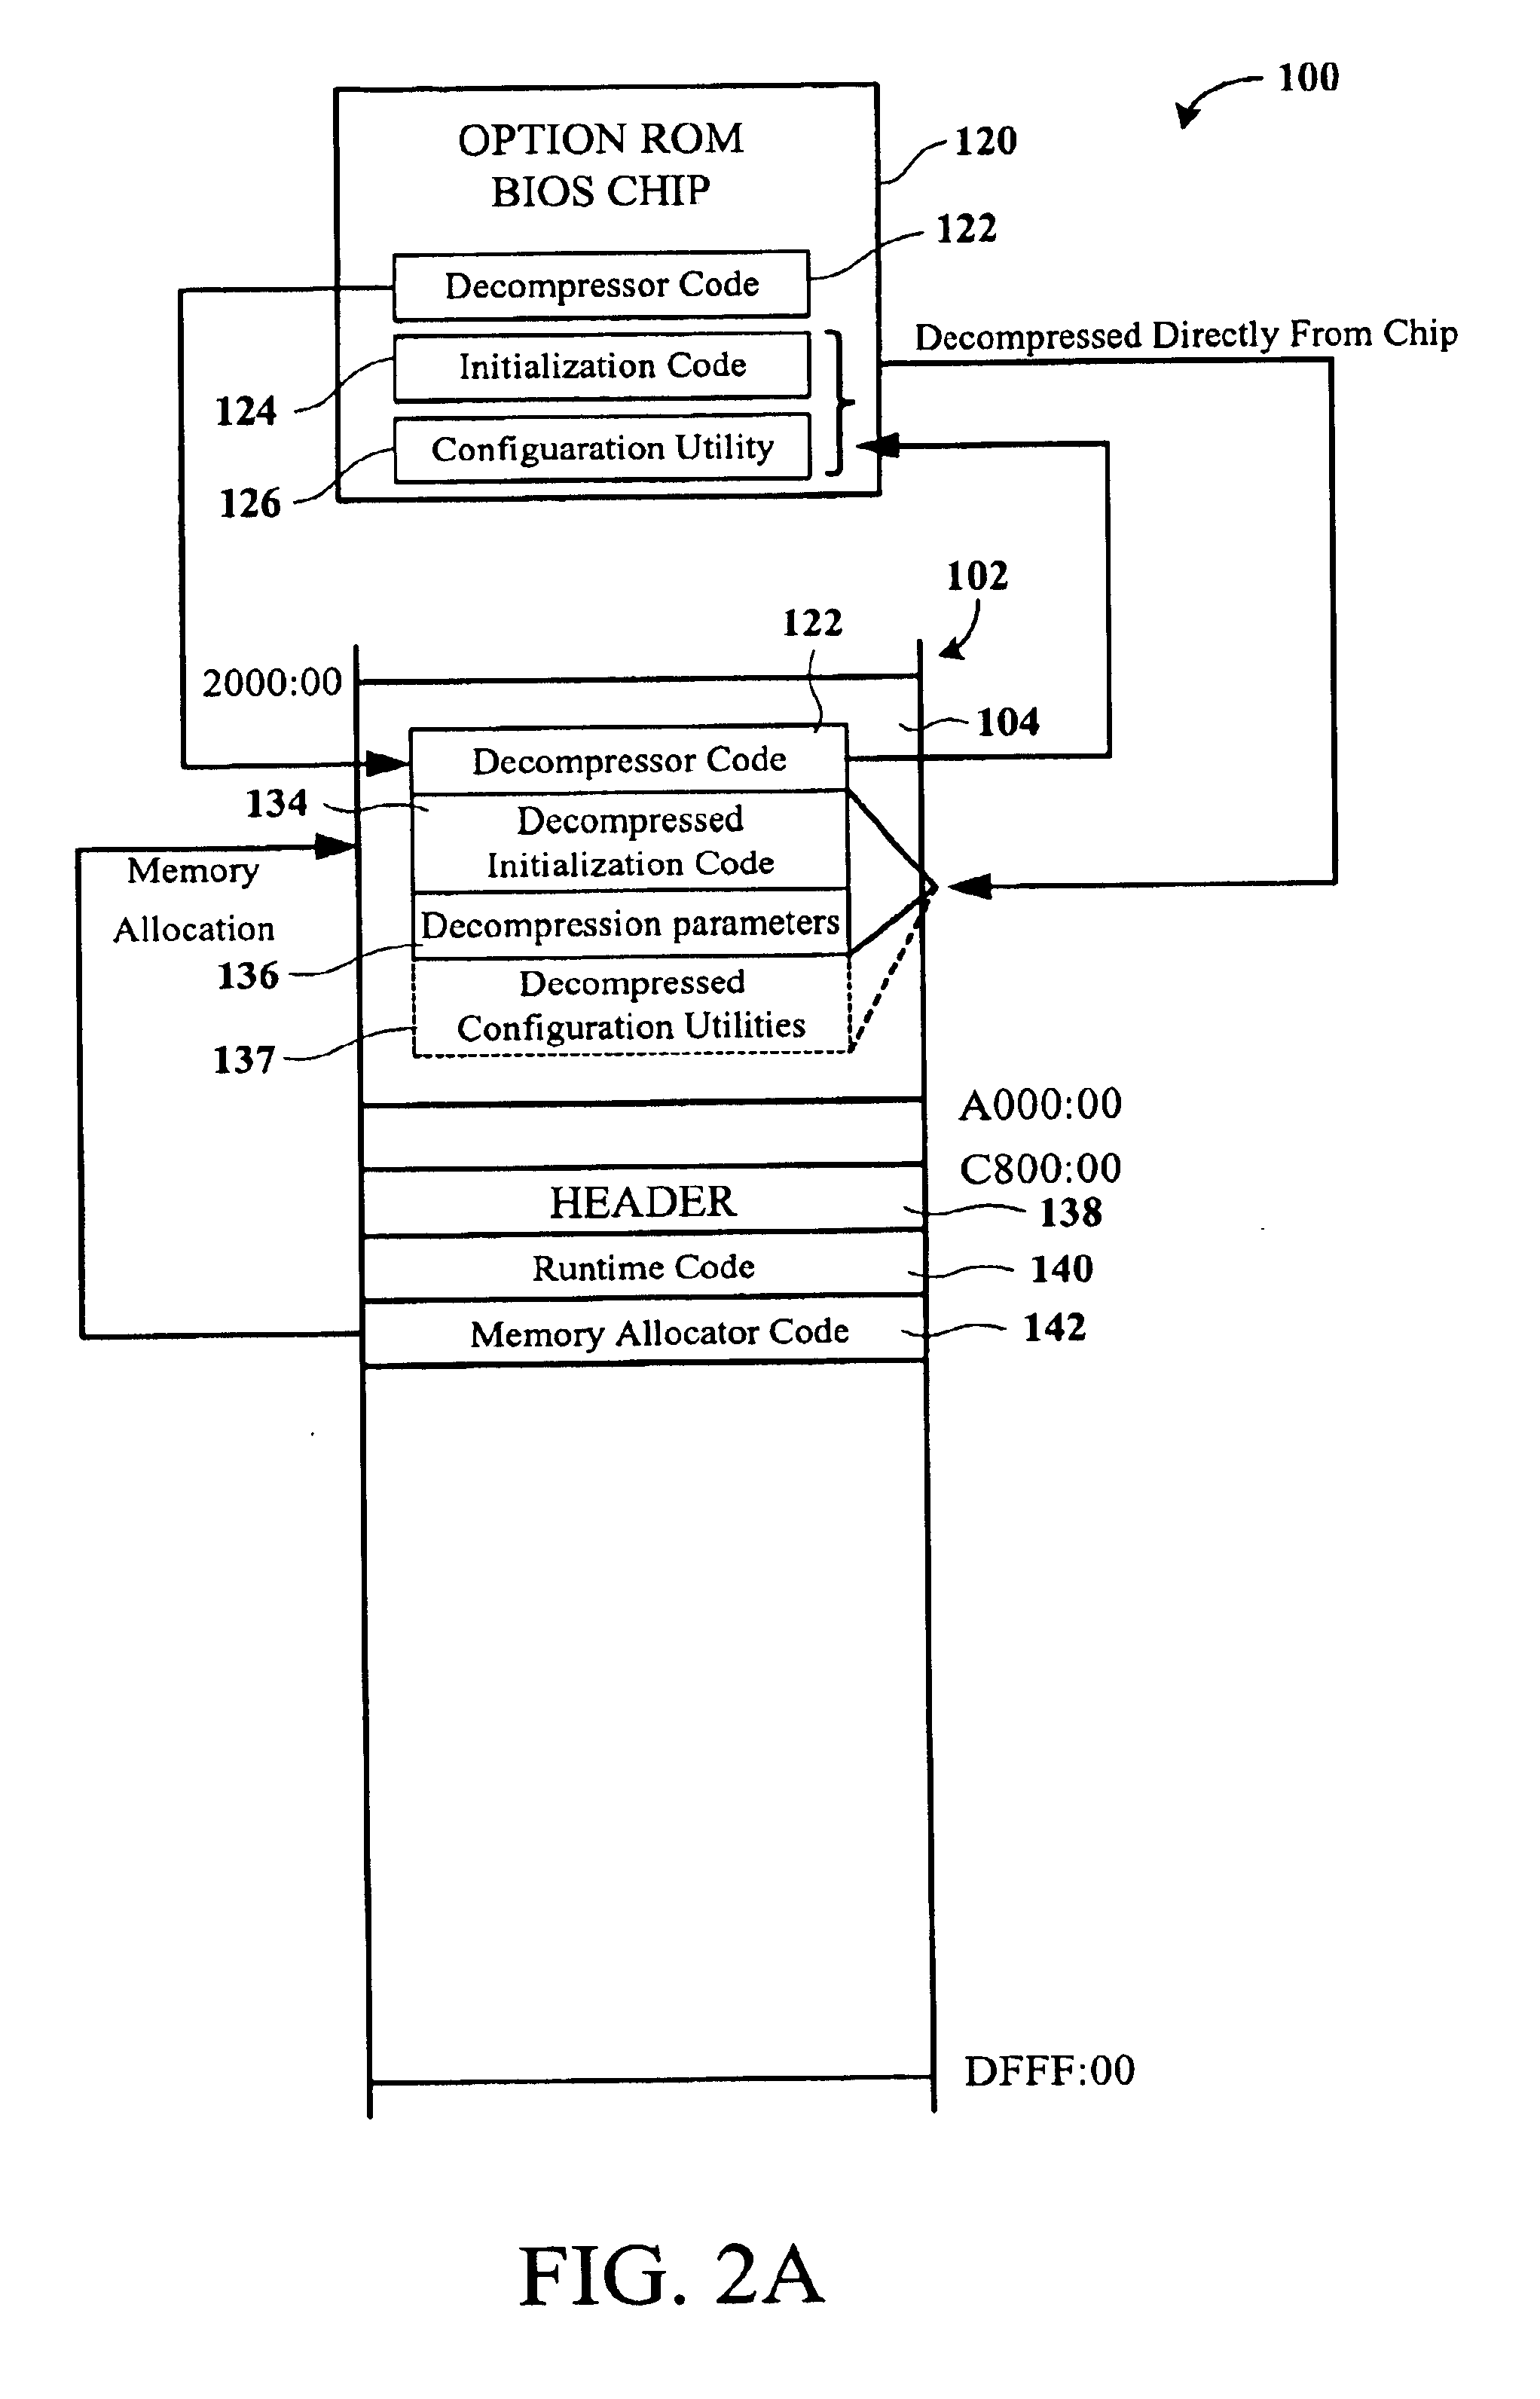 Methods for optimizing memory resources during initialization routines of a computer system